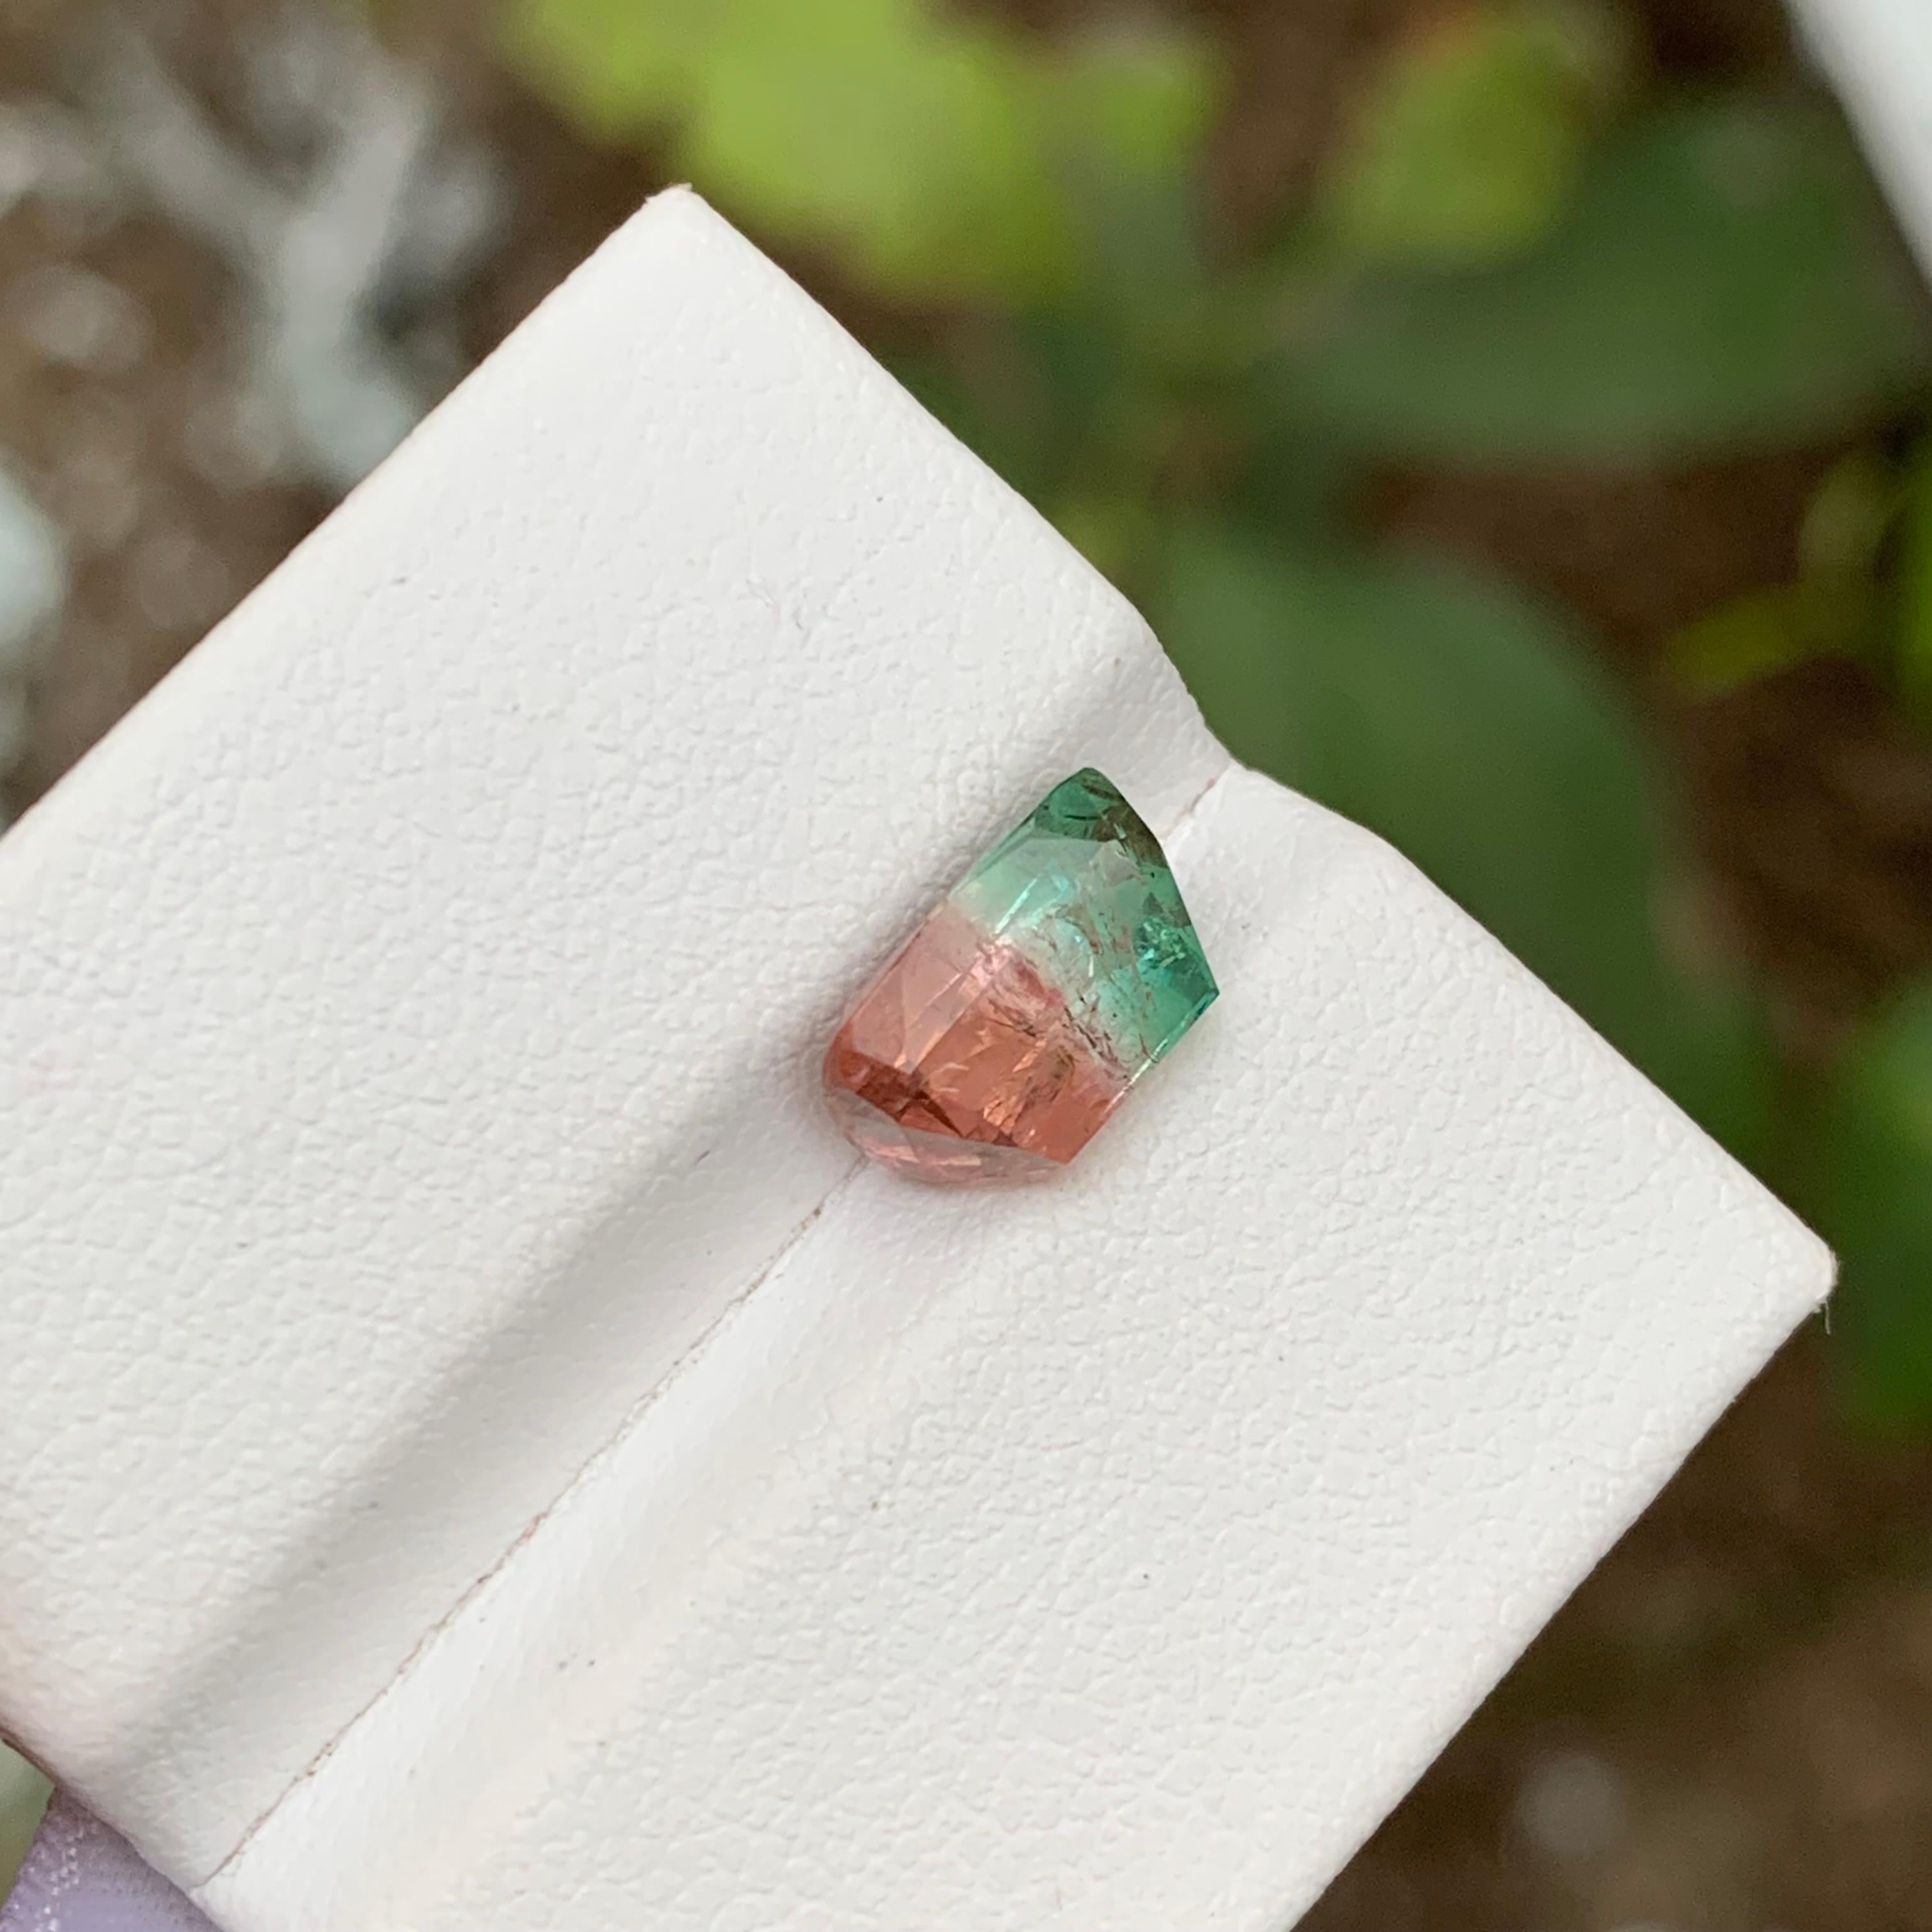 Rare Watermelon Bicolor Tourmaline Gemstone 3.05Ct Cushion Cut for Ring/Jewelry  For Sale 1